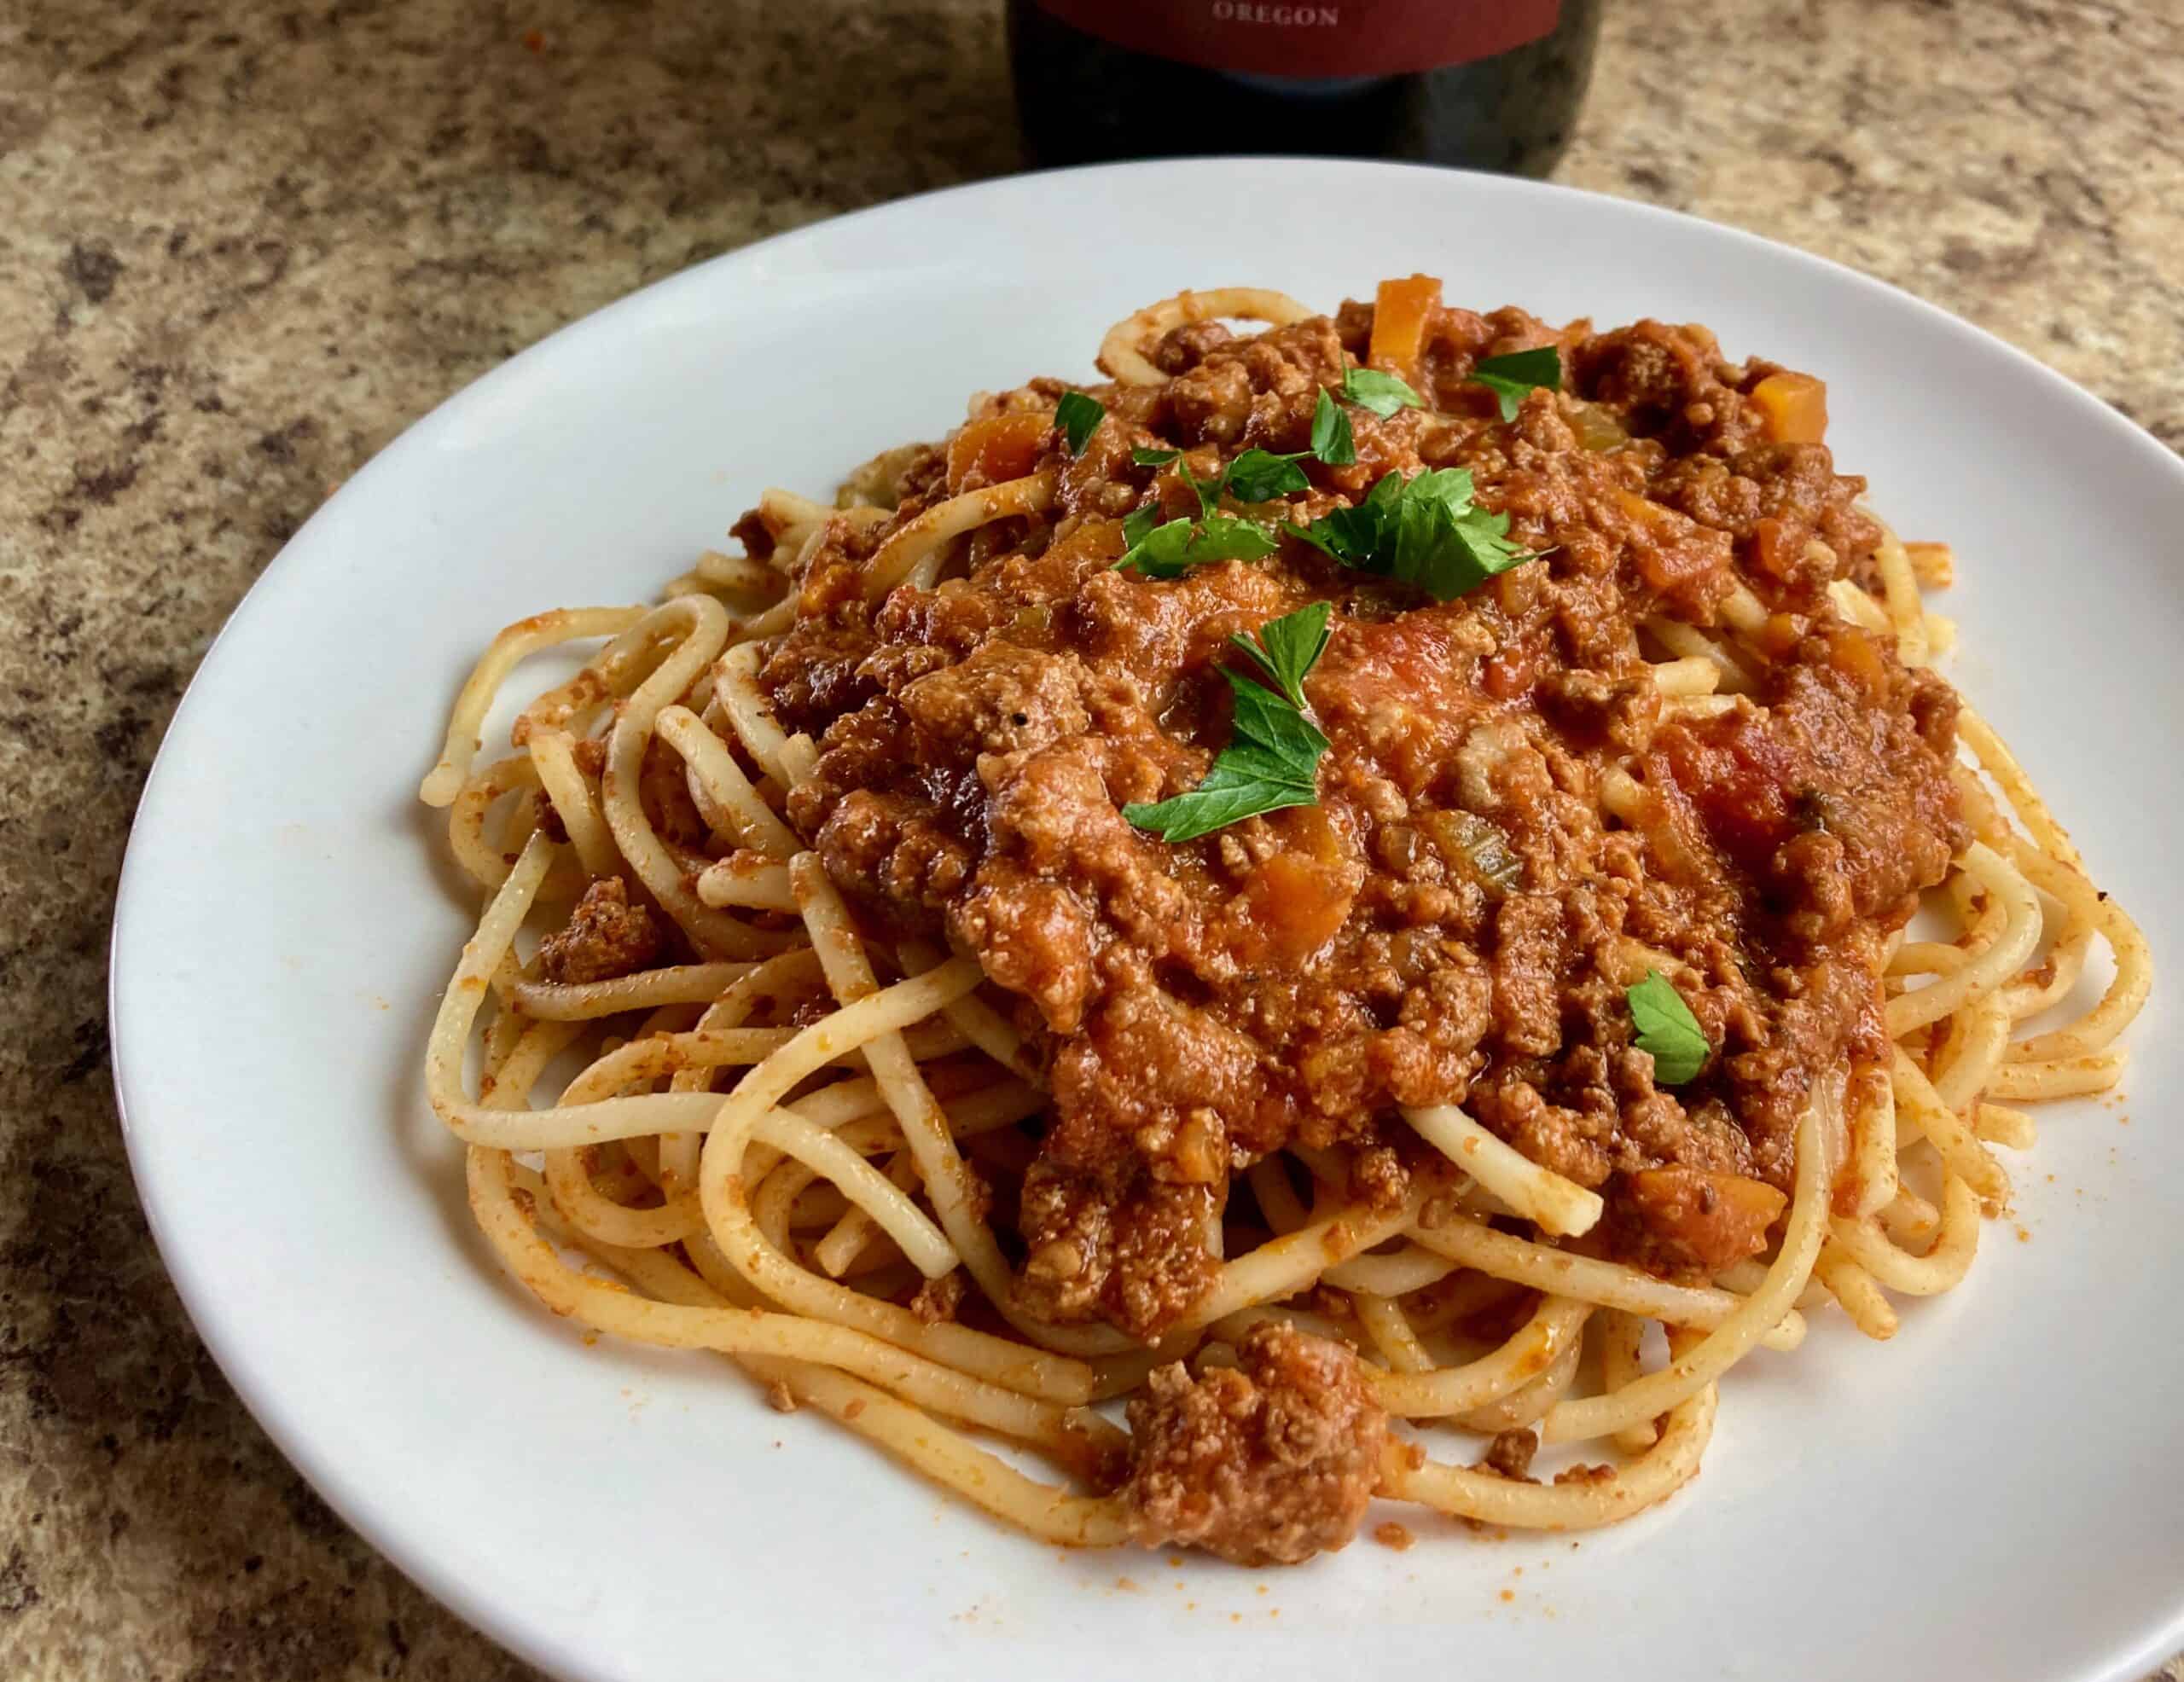 Slow Cooker Turkey Bolognese on Spaghetti Garnished with Chopped Parsley on White Plate.